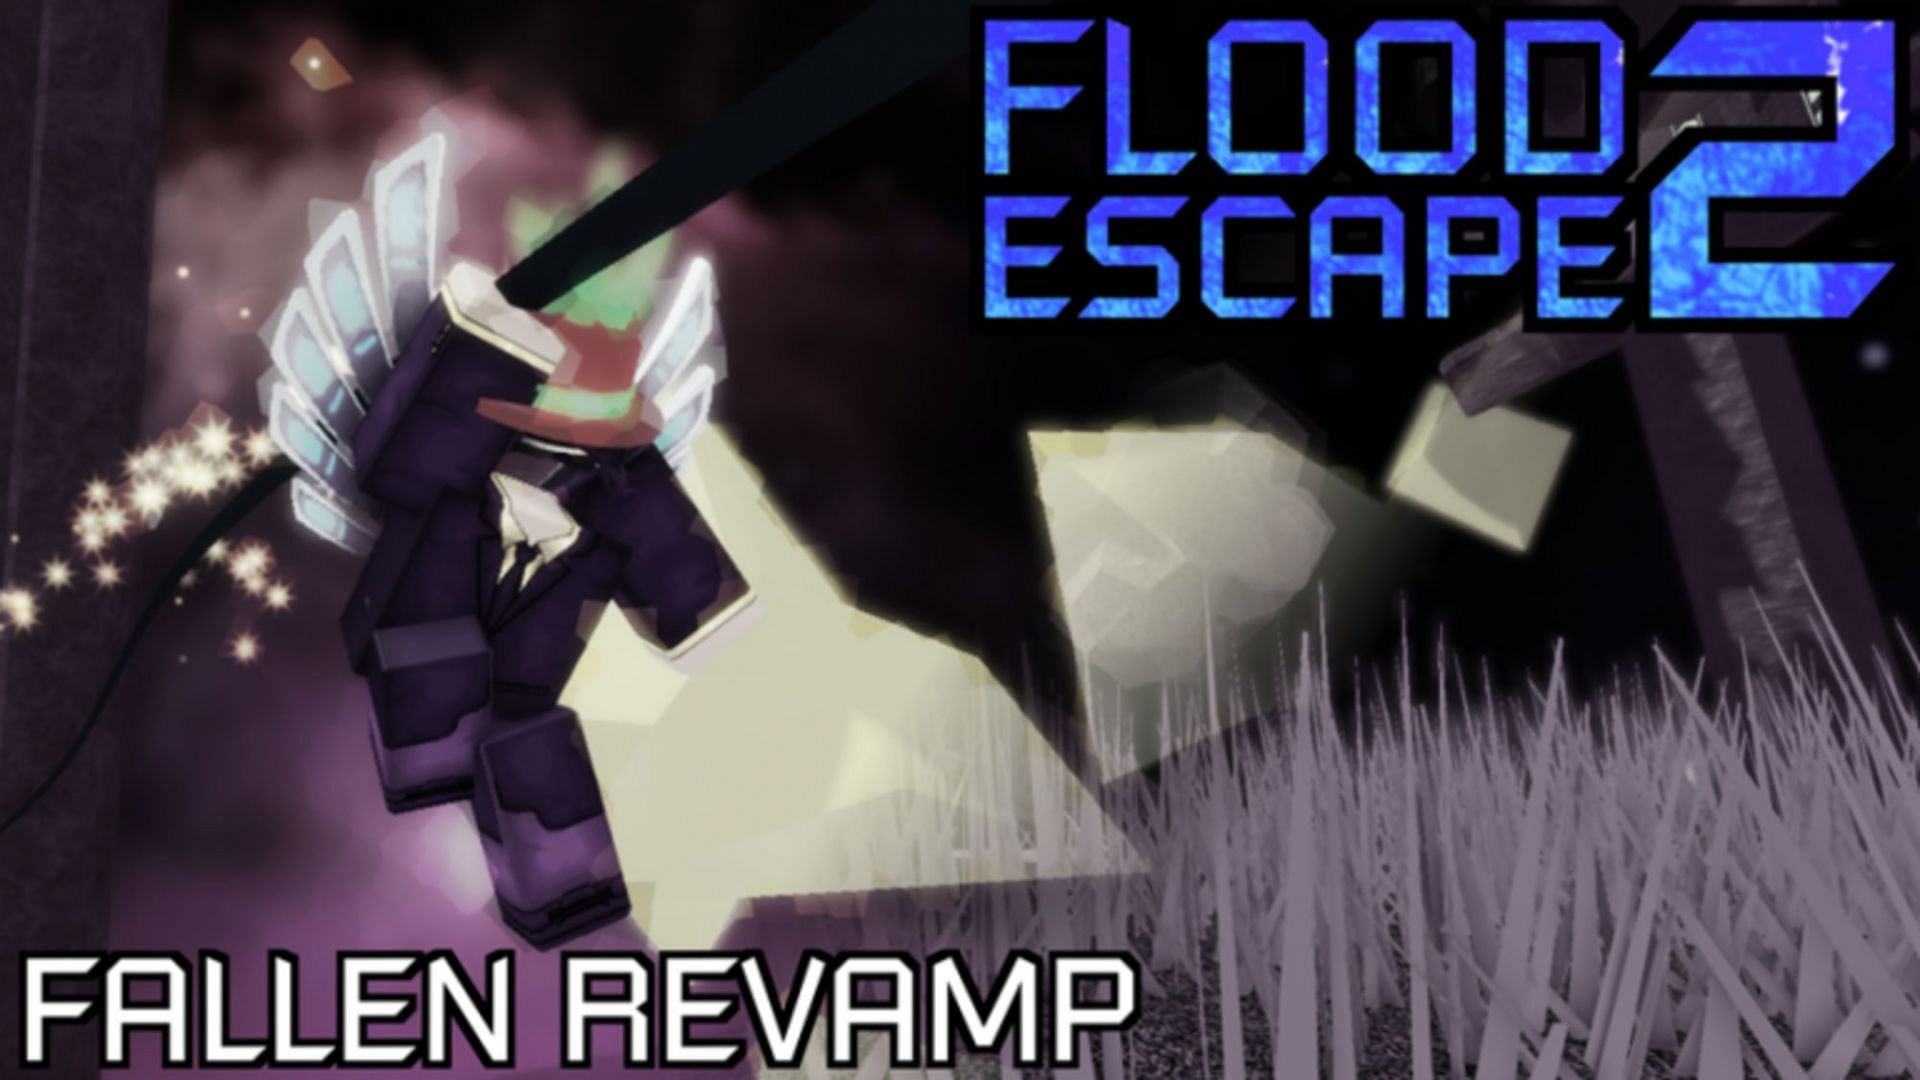 Flood Escape 2 codes in Roblox Free coins, gems, and XP (September 2022)